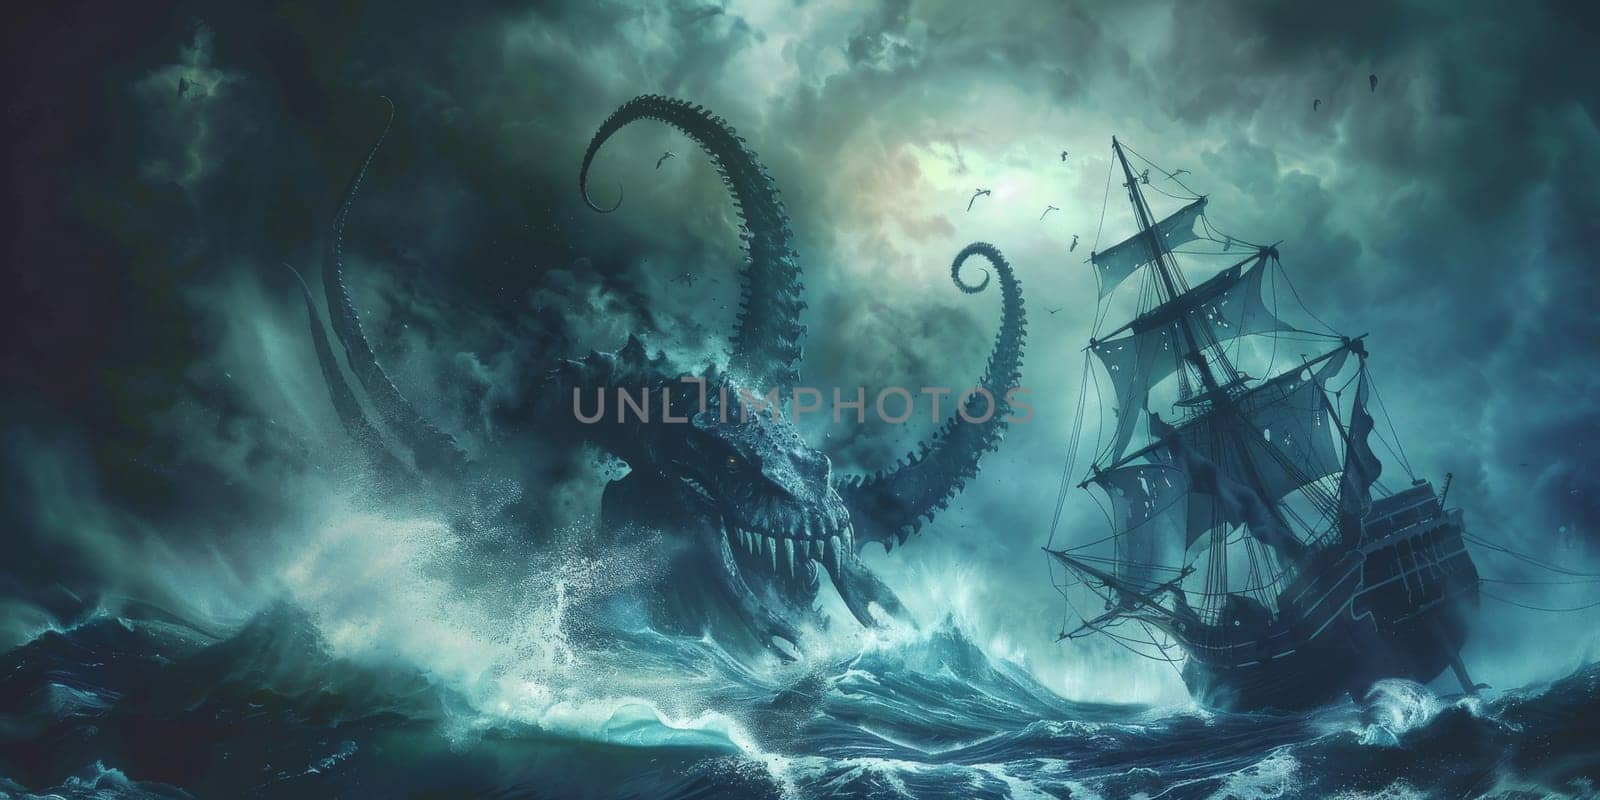 Mystic photo kraken attacking to a ship during storm on the sea, mythical concept by Kadula